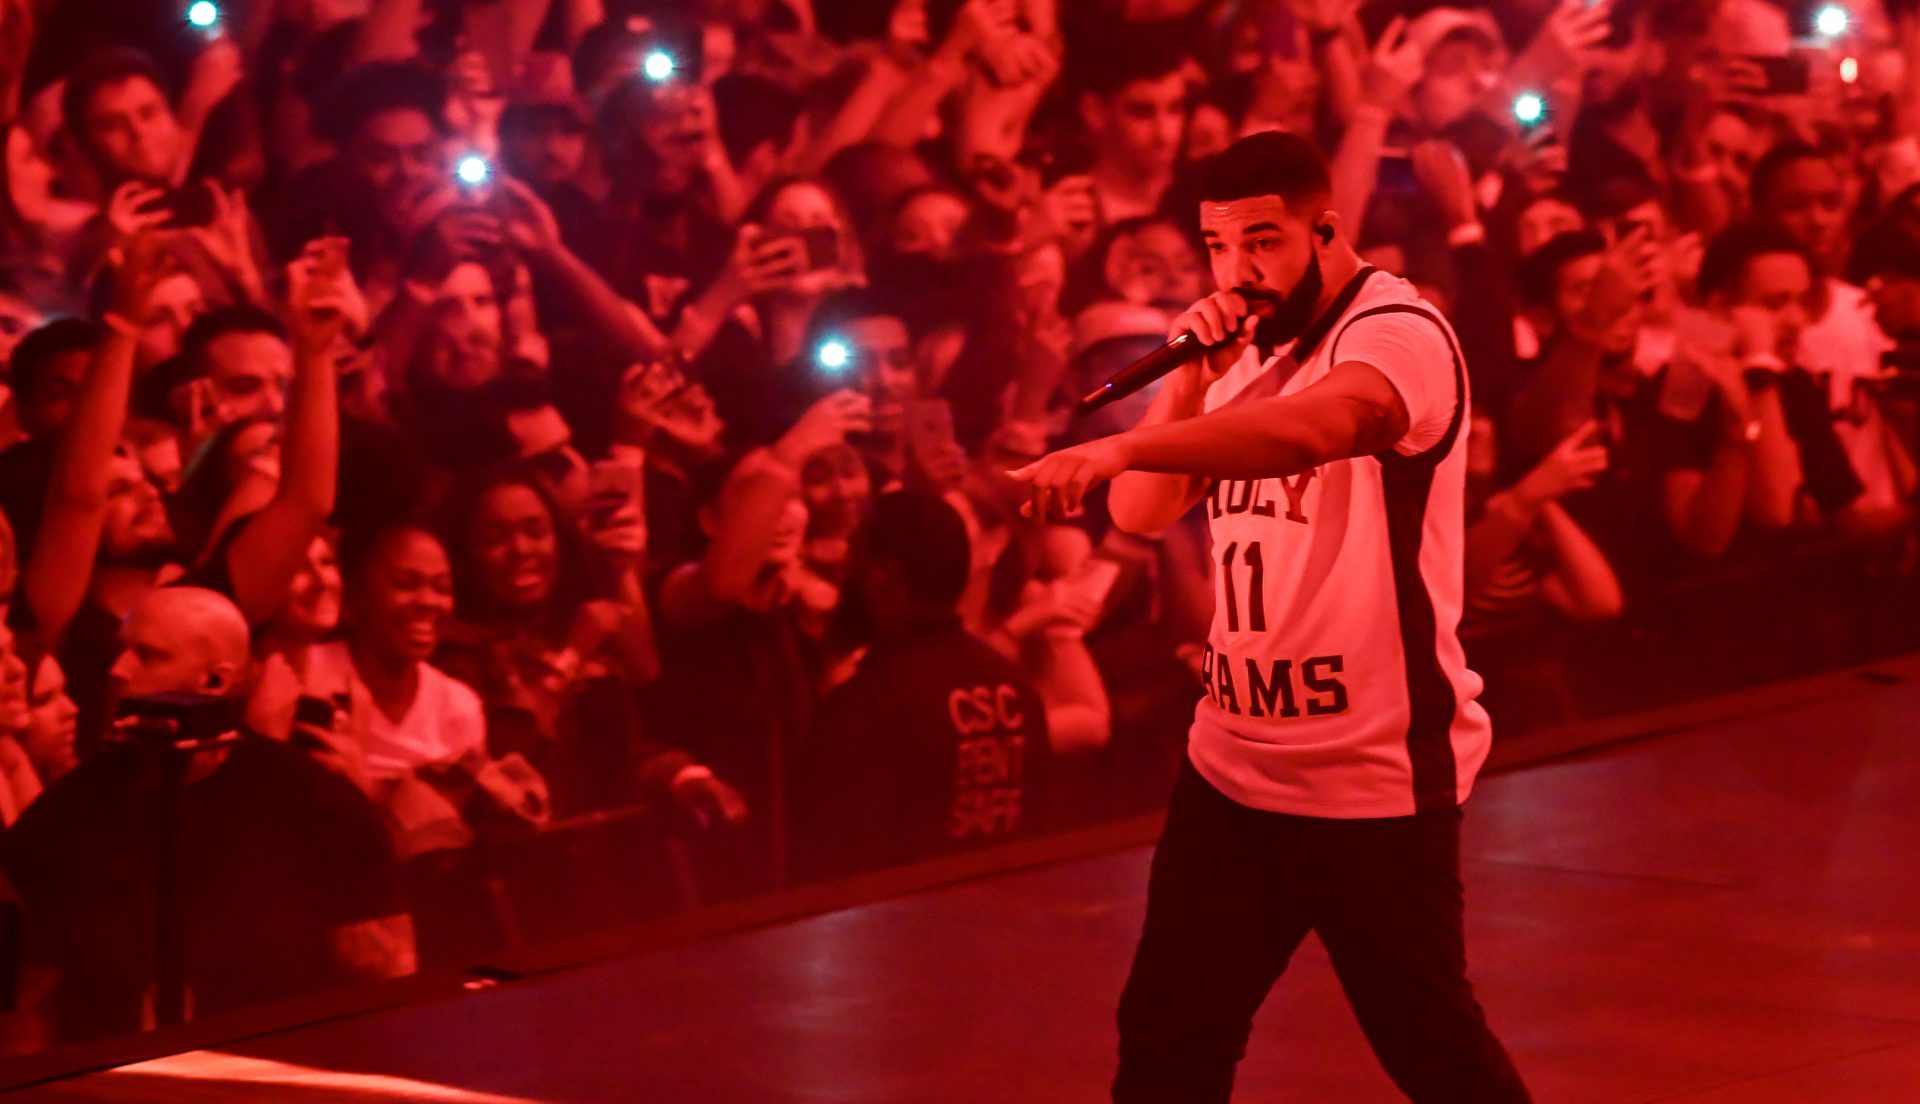 Woman Who Threw Her 36G Bra At Drake Gets Surprise DM